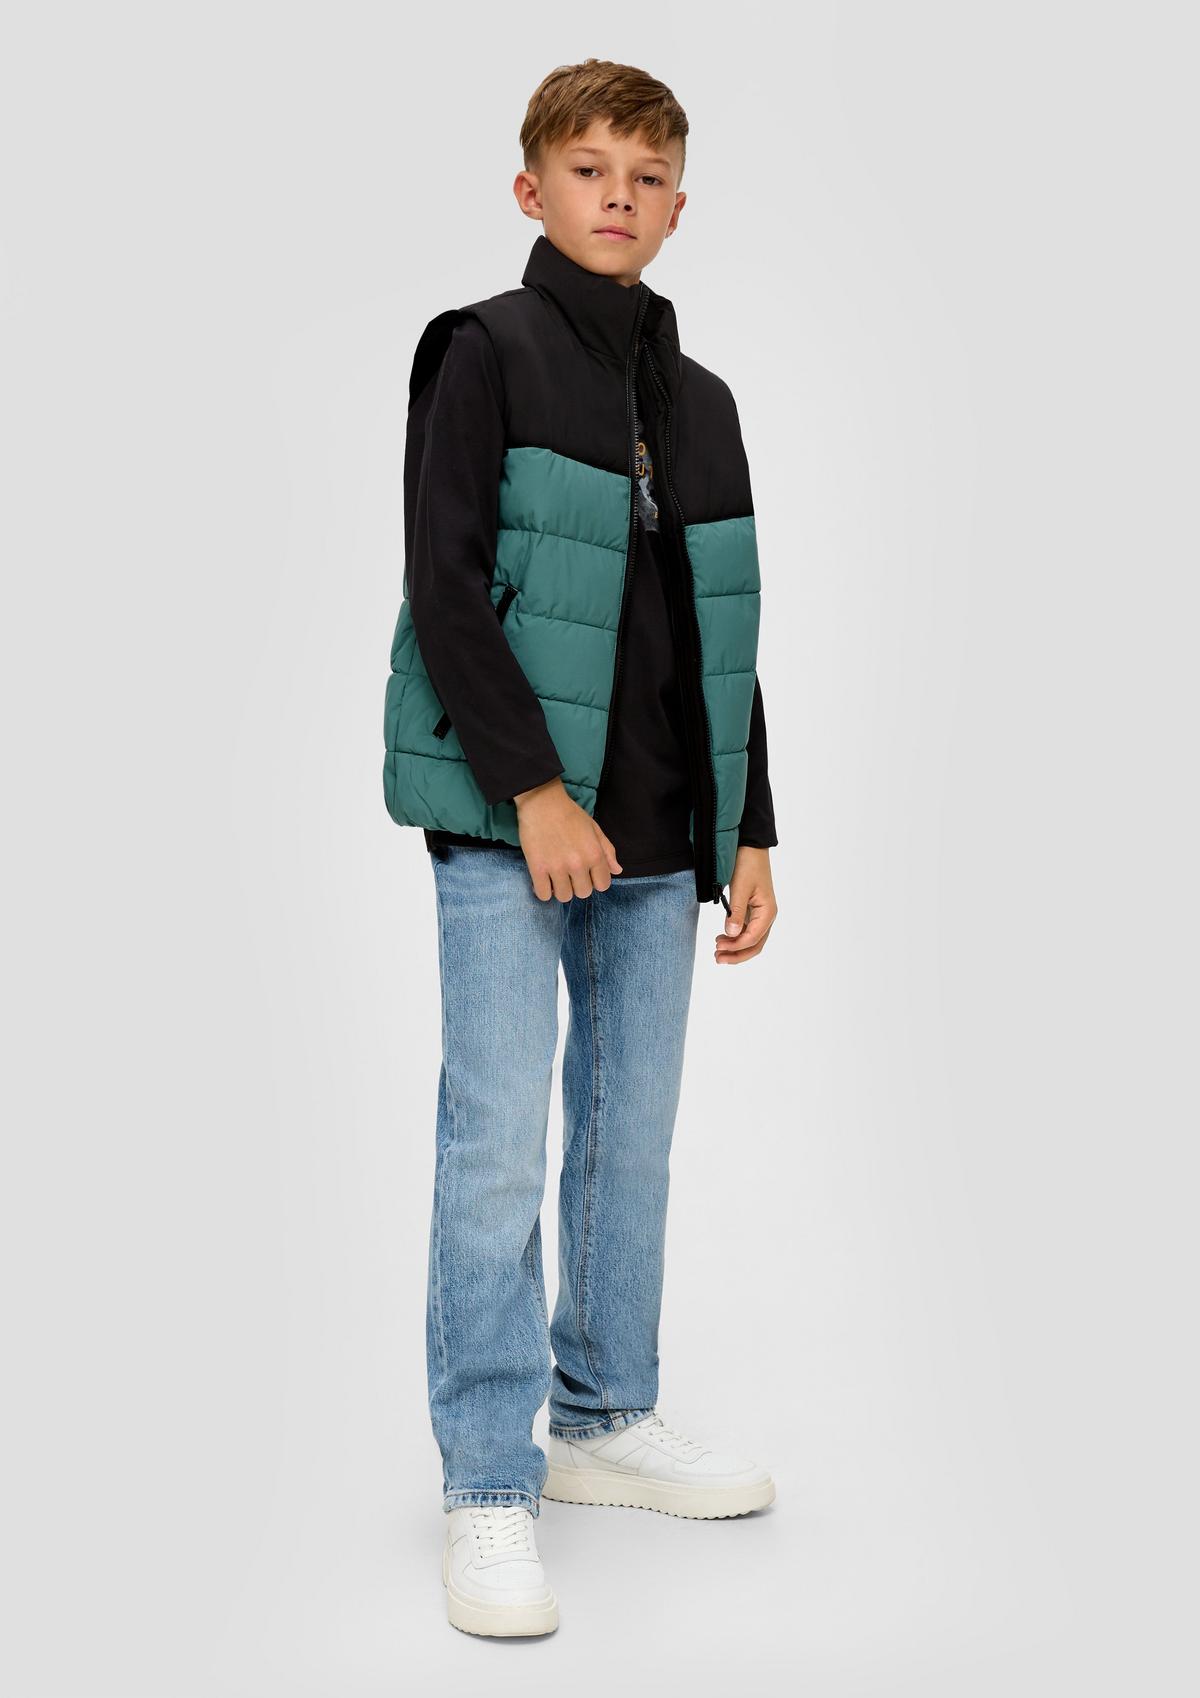 s.Oliver Outdoor body warmer with colour blocking